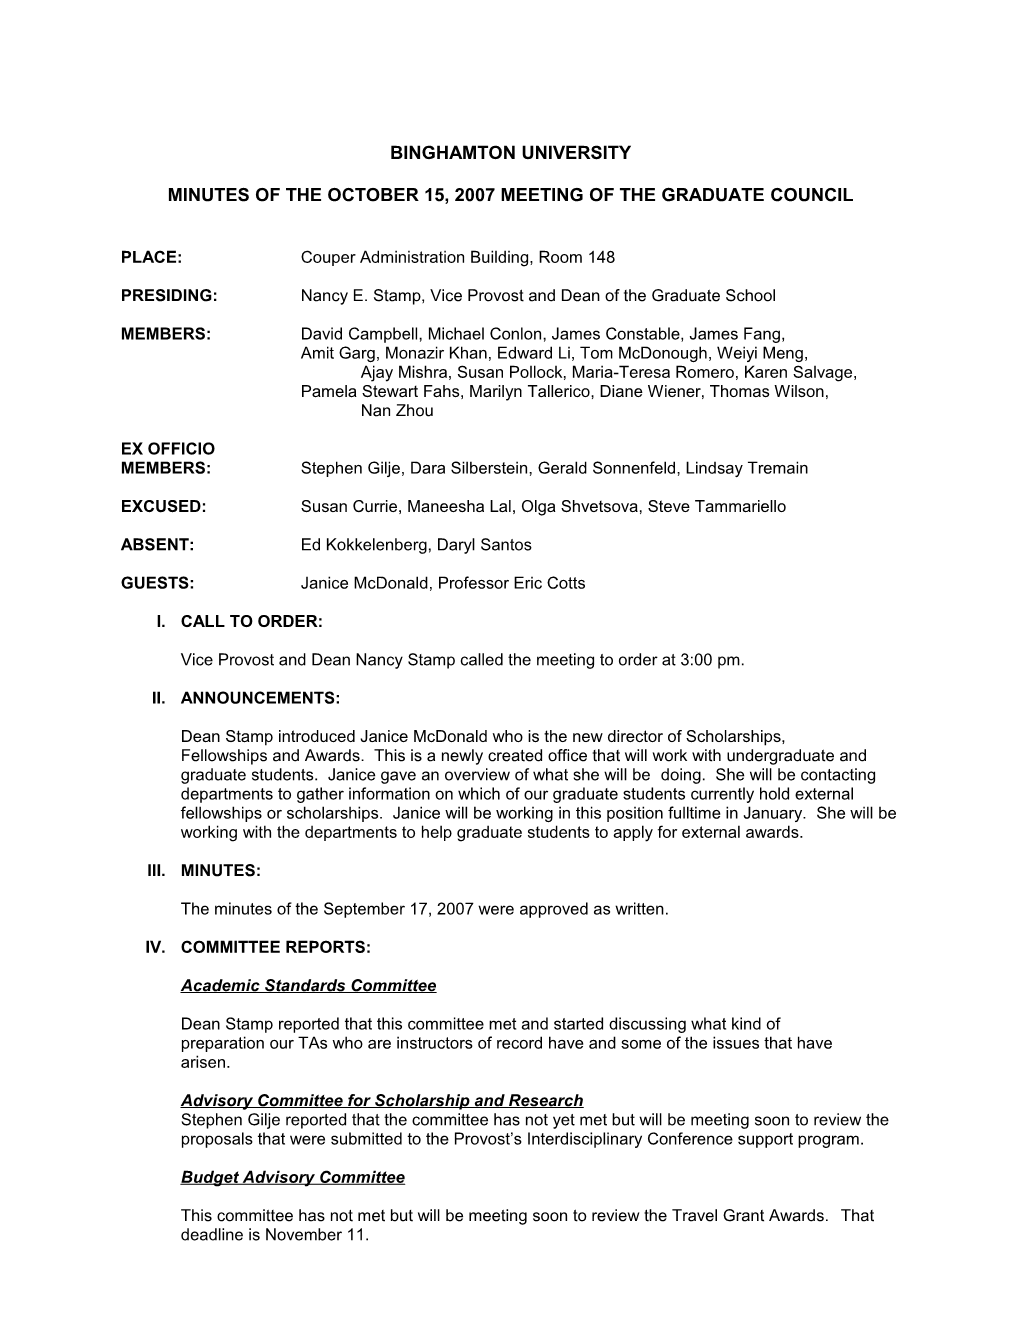 Minutes of the October 15, 2007 Meeting of the Graduate Council